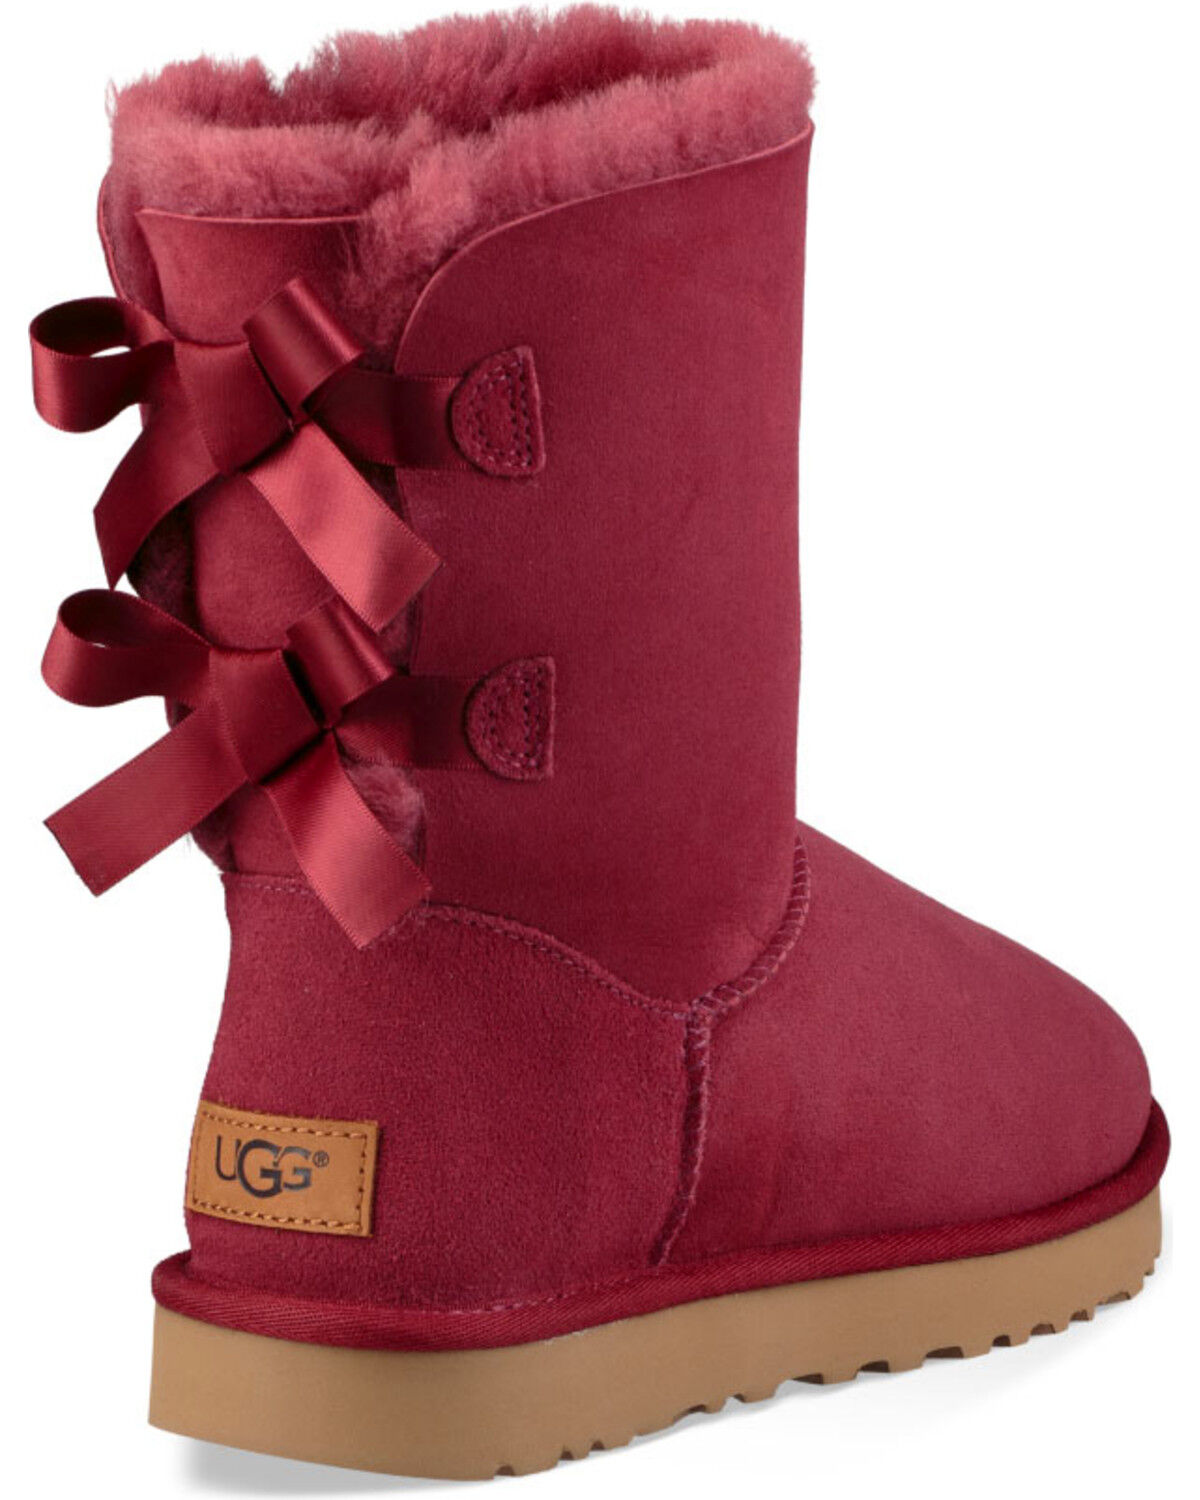 red uggs with bows Cheaper Than Retail 